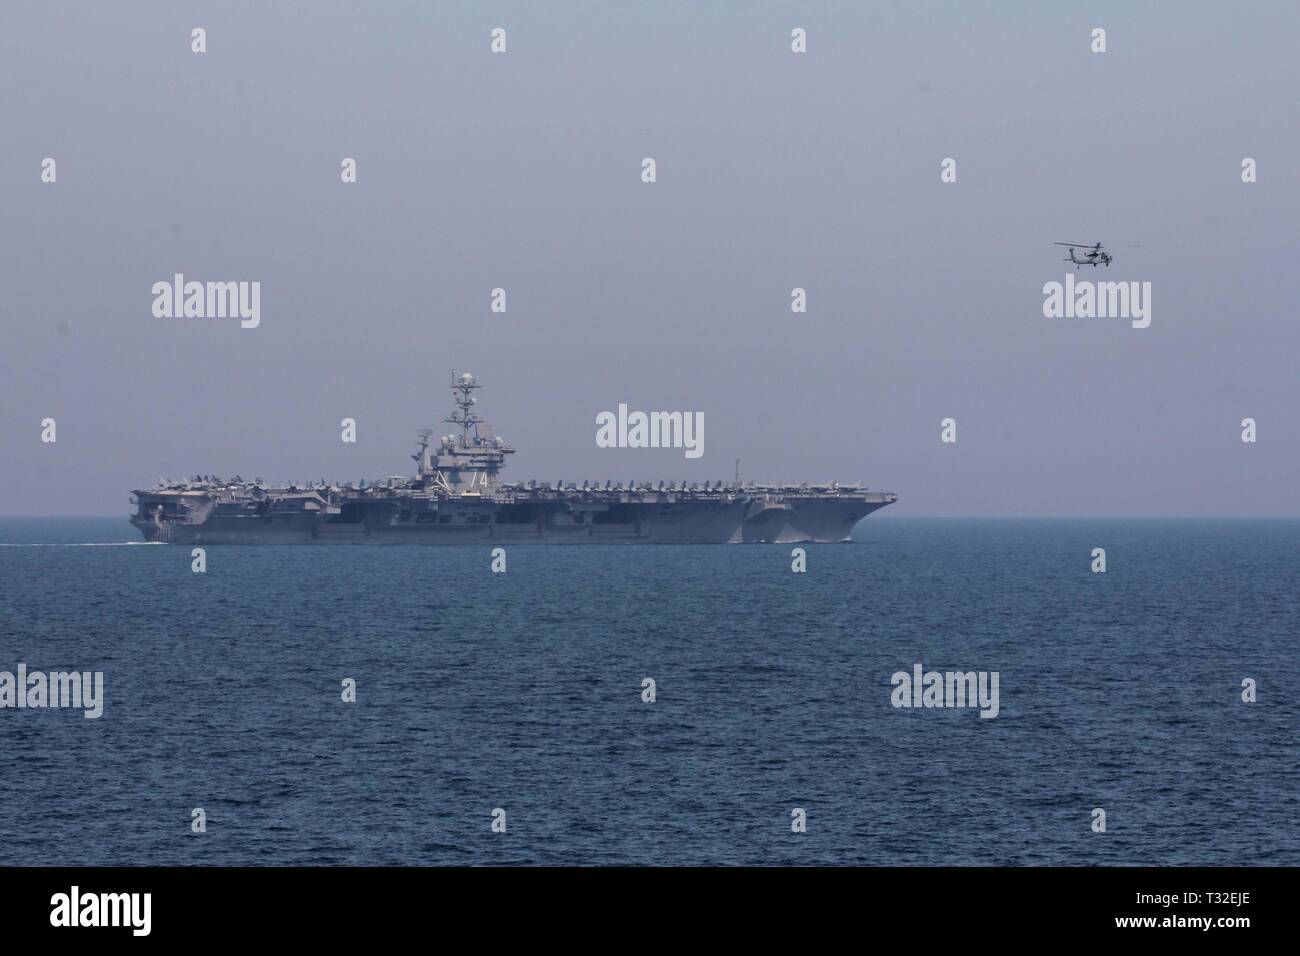 190329-N-GC639-1059 ARABIAN GULF (March 23, 2019) An MH-60S helicopter assigned to Helicopter Sea Combat Squadron (HSC) 14, embarked aboard the aircraft carrier USS John C. Stennis (CVN 74), flies near John C. Stennis while transiting the Arabian Gulf, March 29, 2019. The John C. Stennis Carrier Strike Group is deployed to the U.S. 5th Fleet area of operations in support of naval operations to ensure maritime stability and security in the Central Region, connecting the Mediterranean and the Pacific through the western Indian Ocean and three strategic choke points. (U.S. Navy photo by Mass Comm Stock Photo